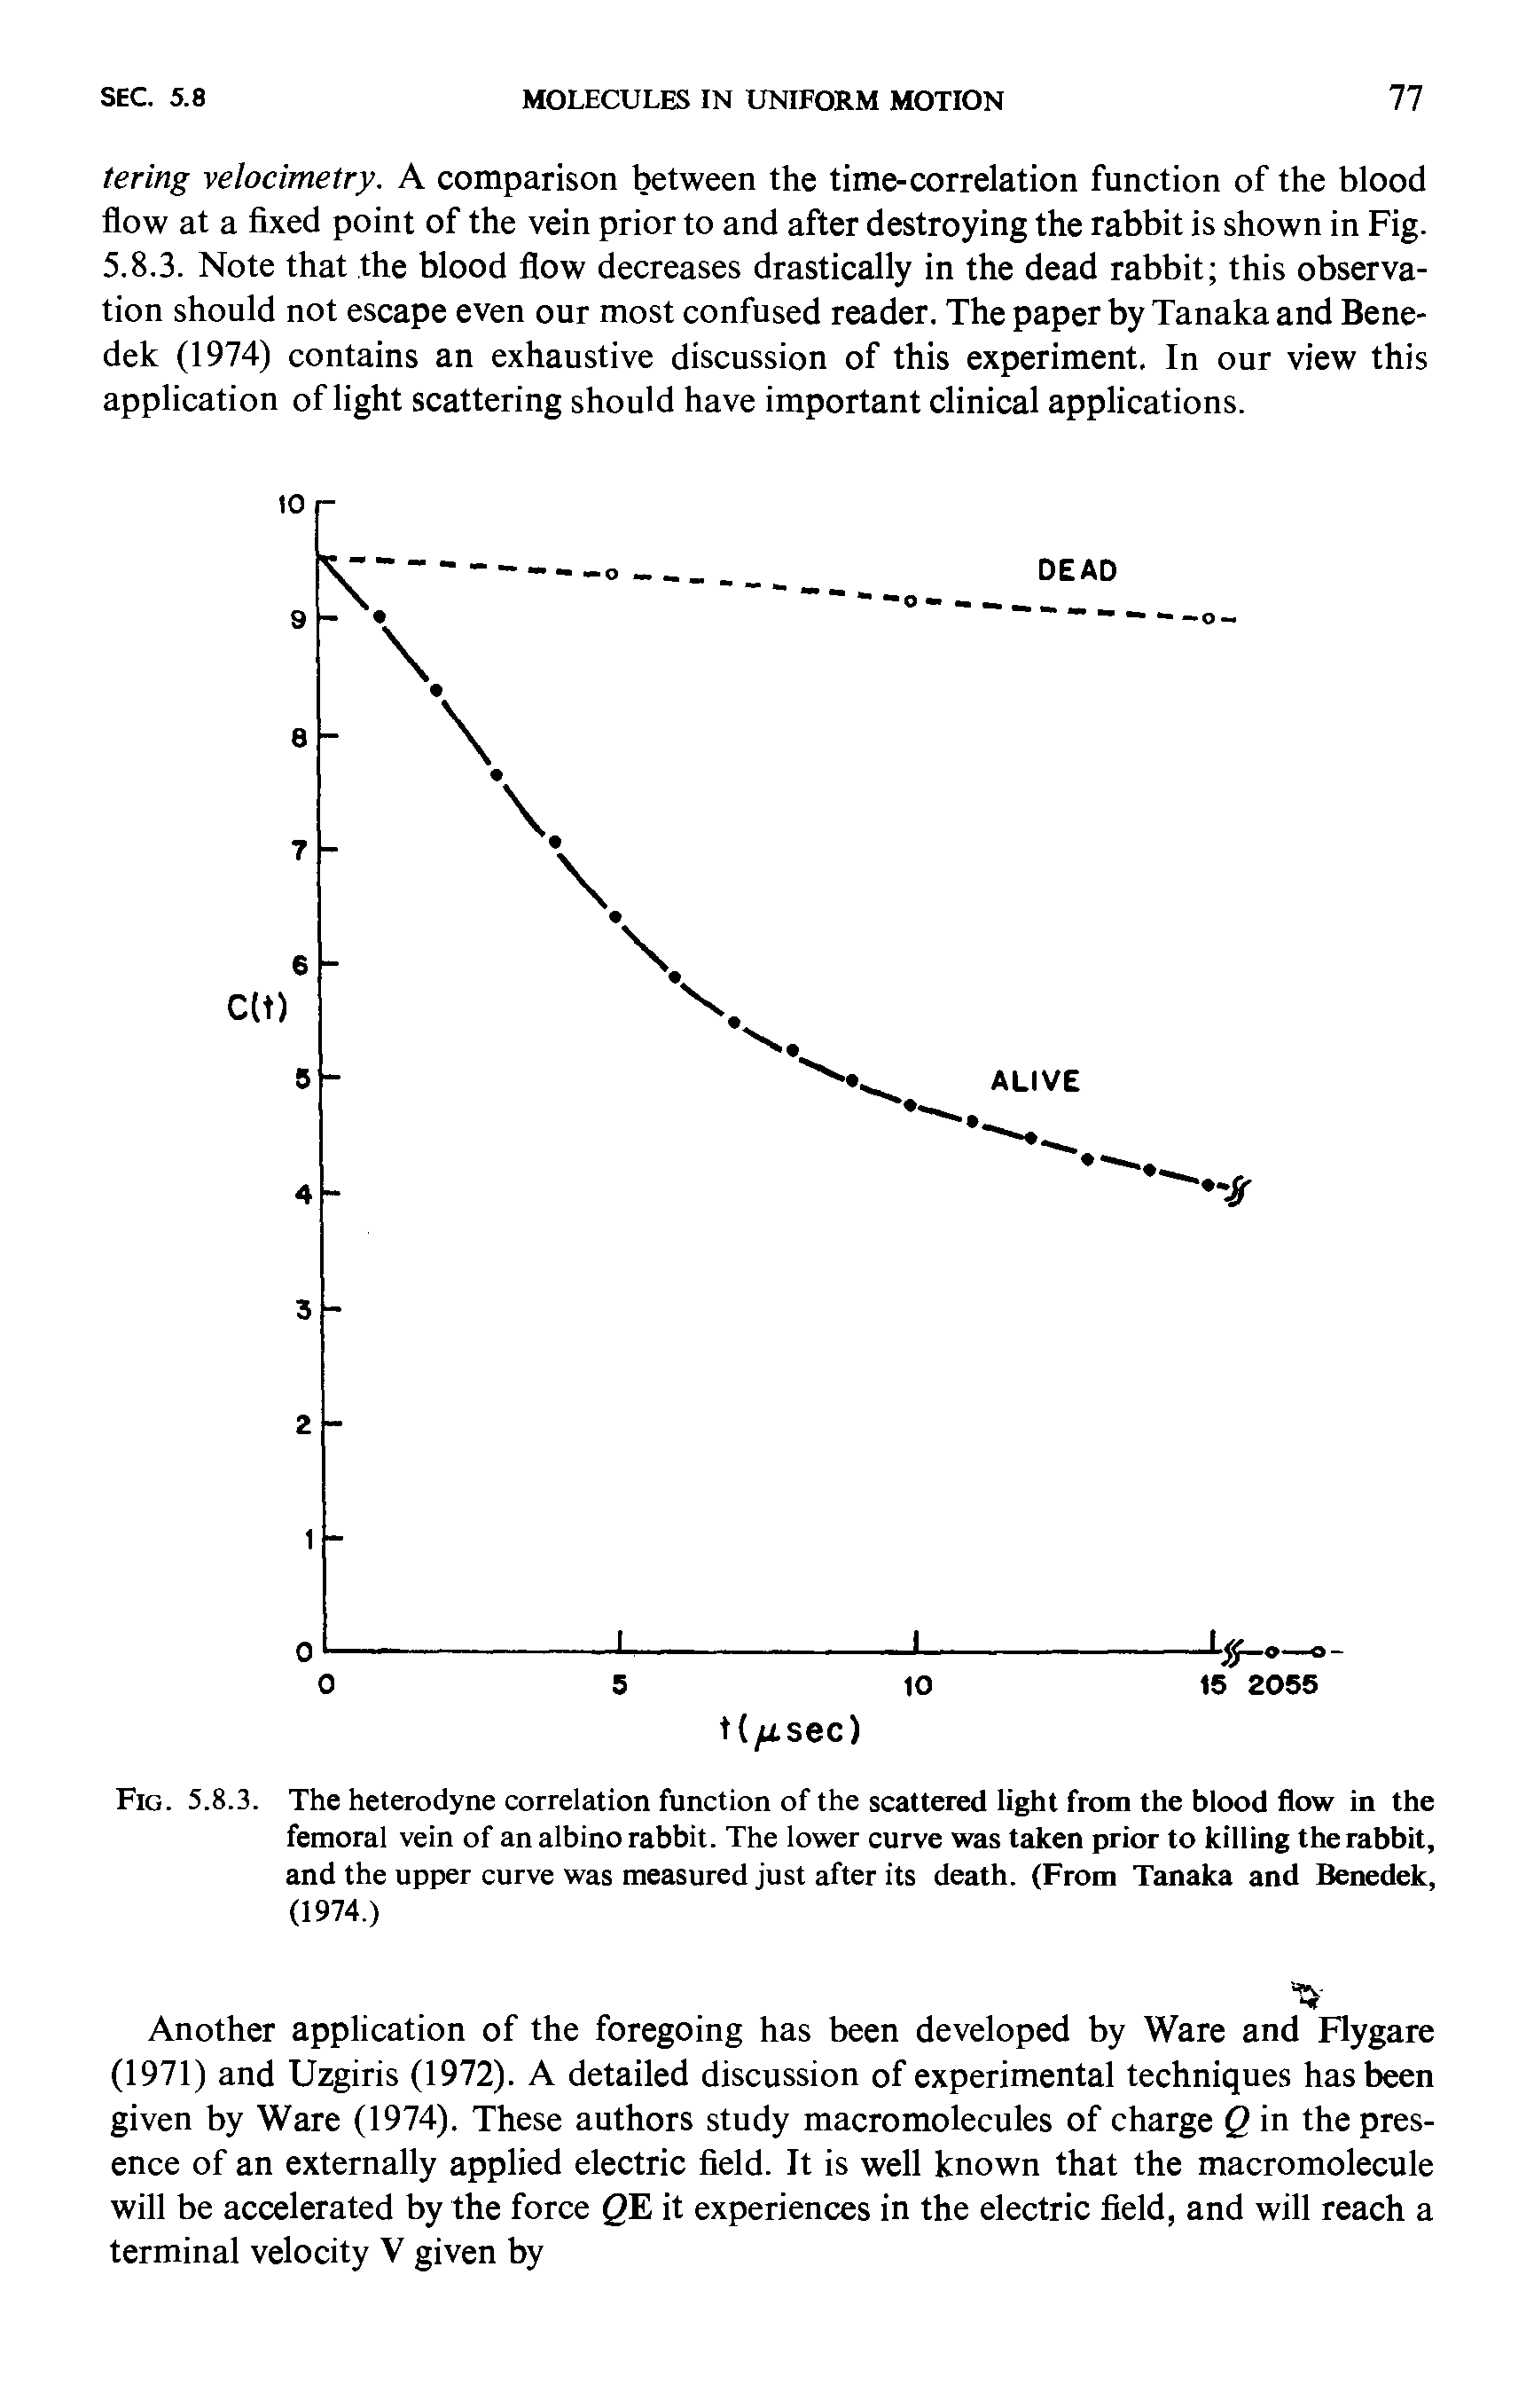 Fig. 5.8.3. The heterodyne correlation function of the scattered light from the blood flow in the femoral vein of an albino rabbit. The lower curve was taken prior to killing the rabbit, and the upper curve was measured just after its death. (From Tanaka and Benedek, (1974.)...